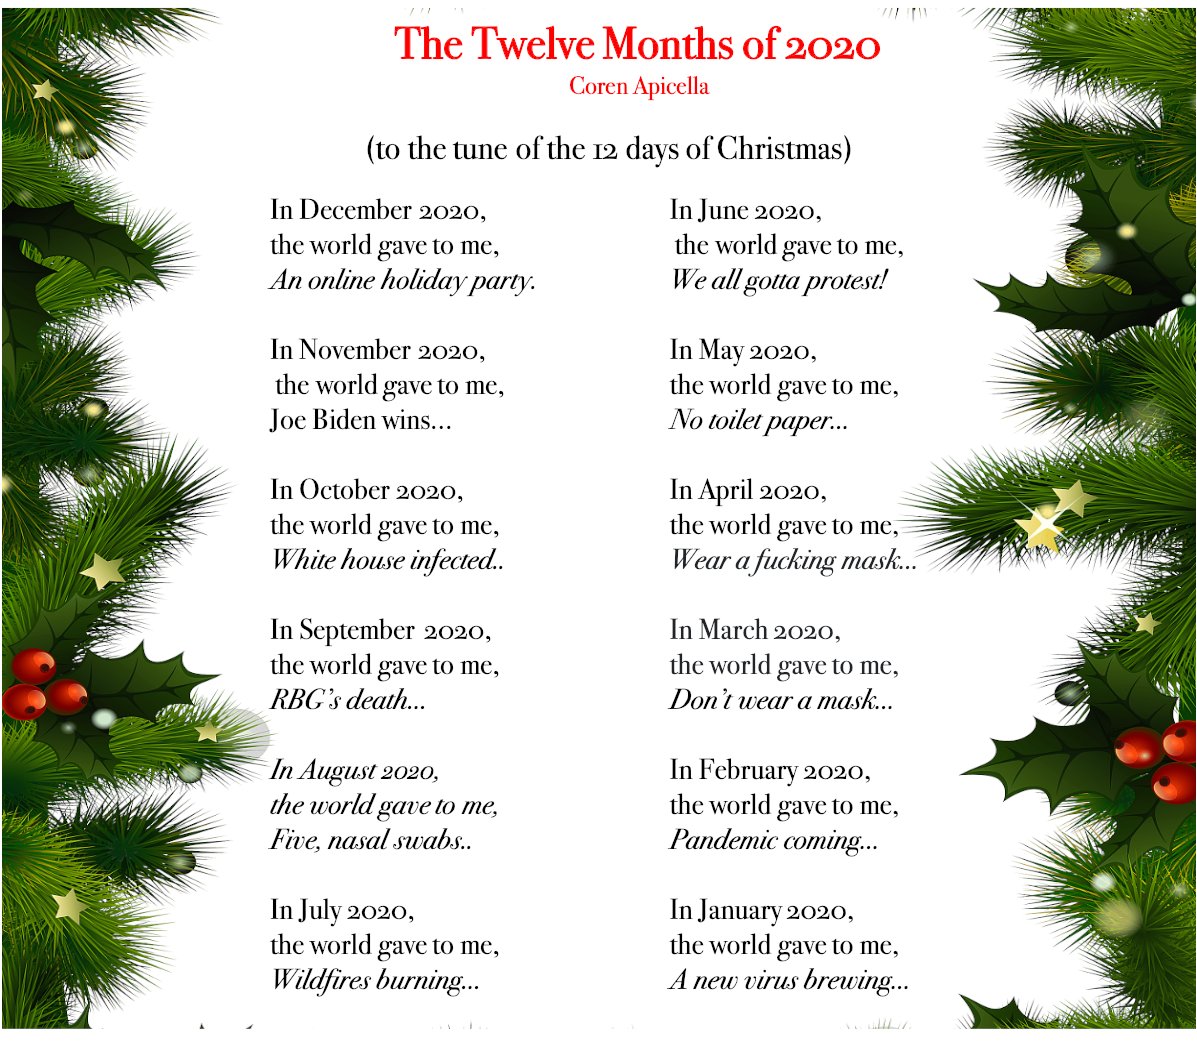 I wrote this holiday song 'The 12 Months of 2020' to commemorate this year. It can be sung at your next online or outdoor holiday party. Thanks to my friends and colleagues who indulged me by singing it. #12monthsof2020 #12daysofchristmas #holidaysongs